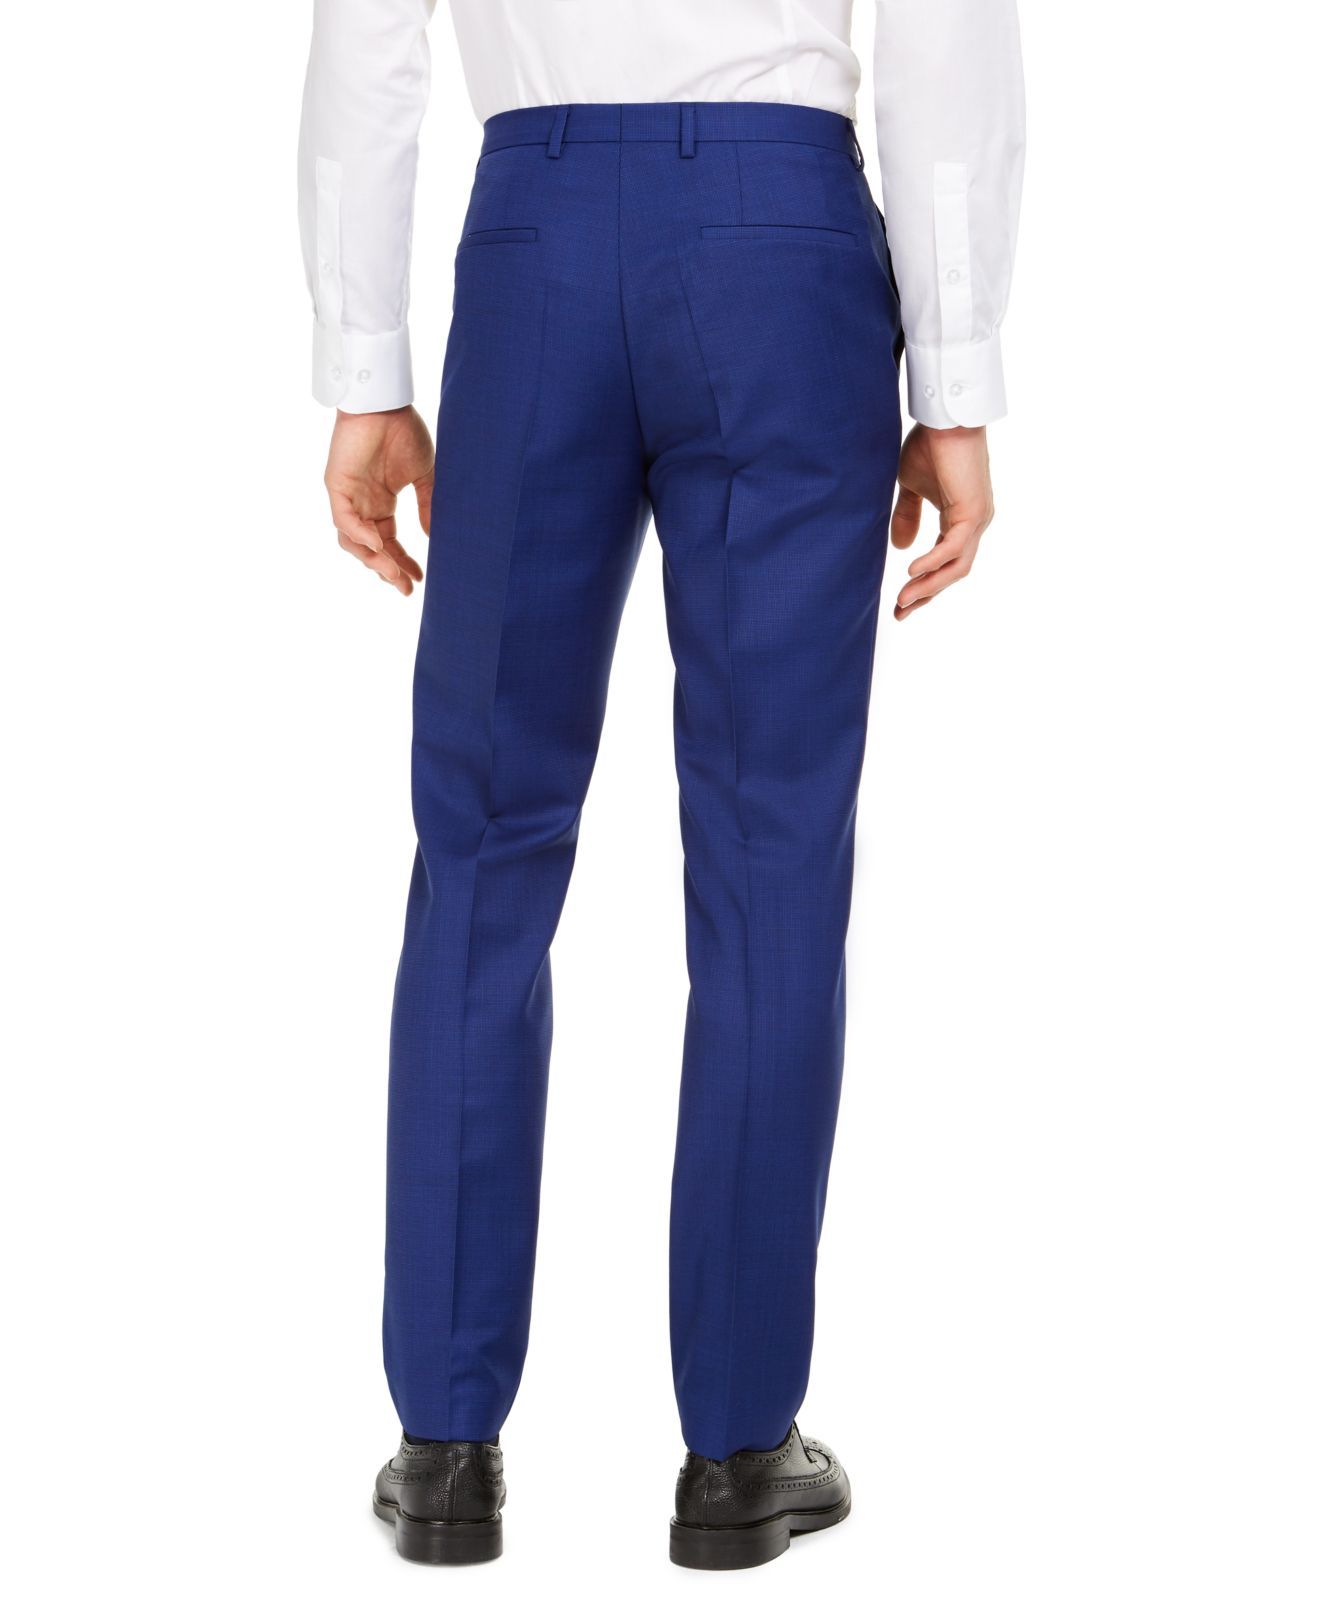 Color: Blues Size Type: Regular Bottoms Size (Men's): 32 Inseam: 30 Type: Pants Style: Dress Pants Occasion: Formal Material: 100% Wool. style:straight. fit:slim. occasion:causal. wash:dark-wash